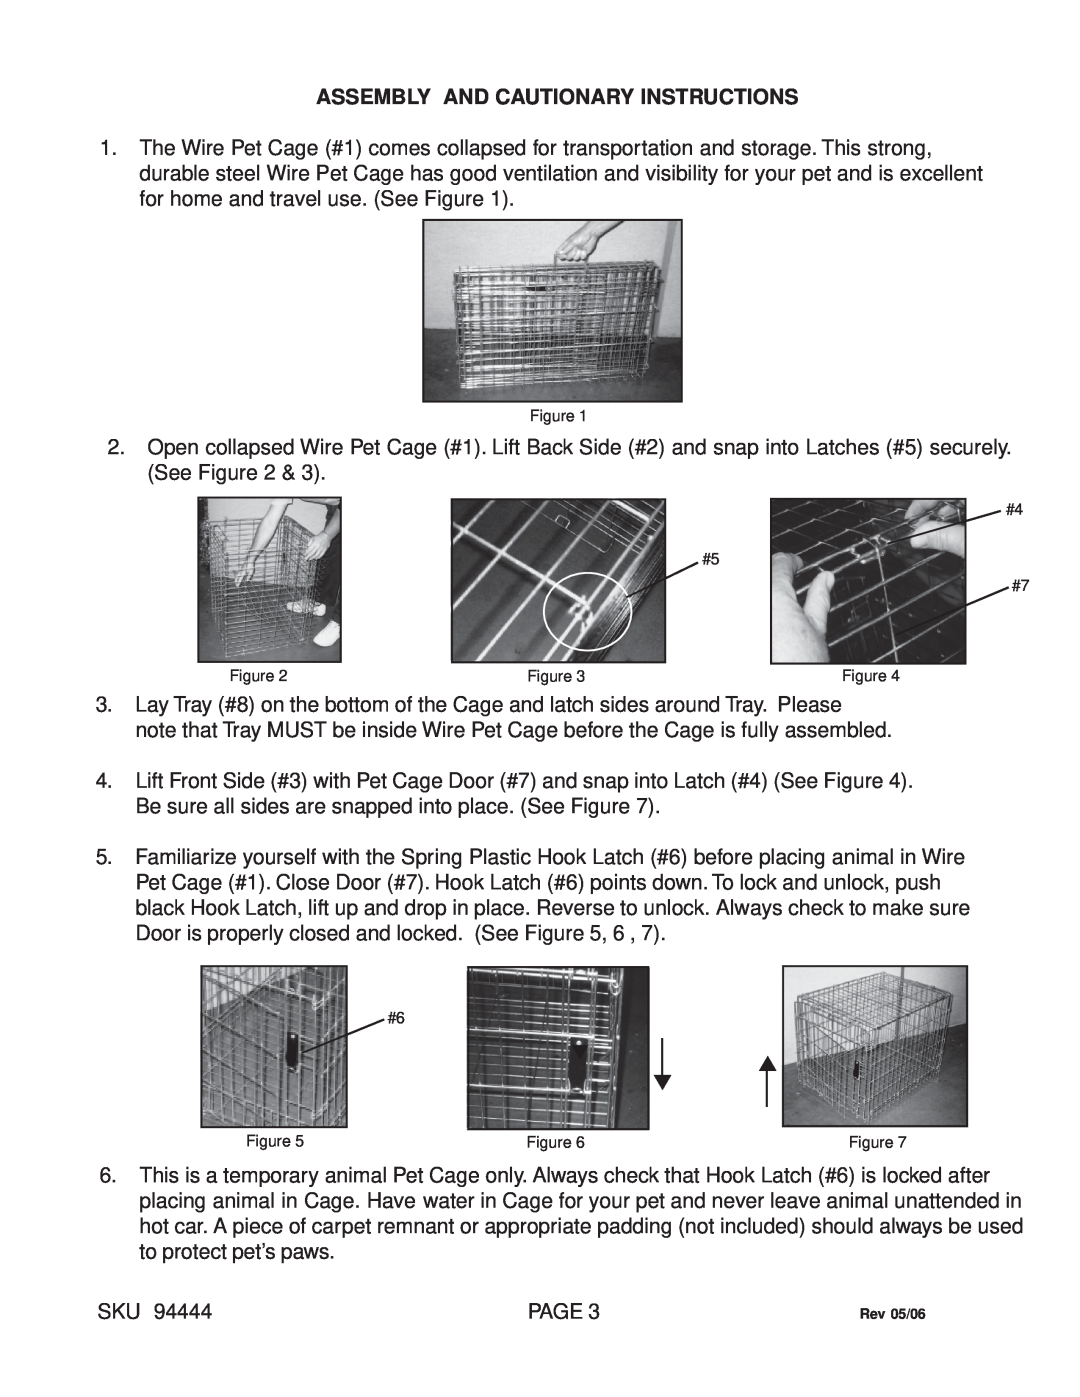 Harbor Freight Tools Deluxe Pet Crate with Tray, 94444 manual Assembly And Cautionary Instructions 